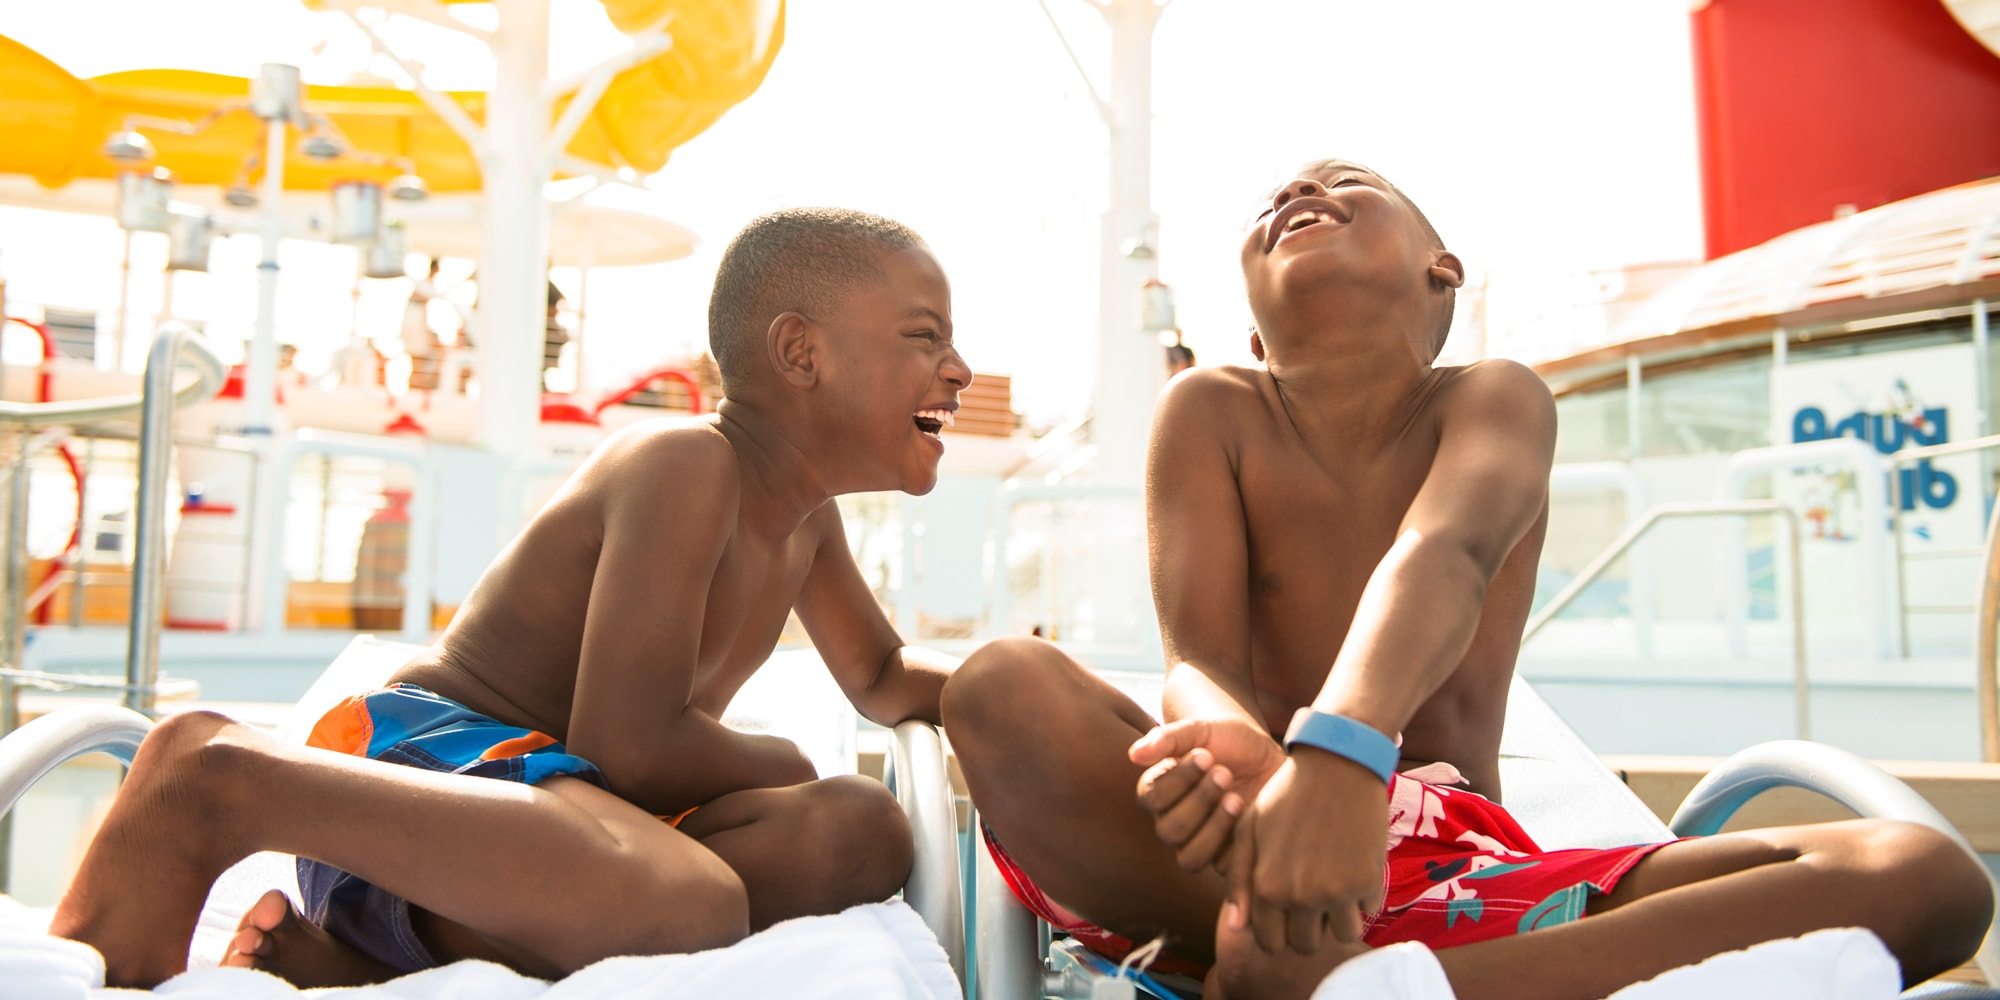 Two boys laughing and enjoying the pool on deck